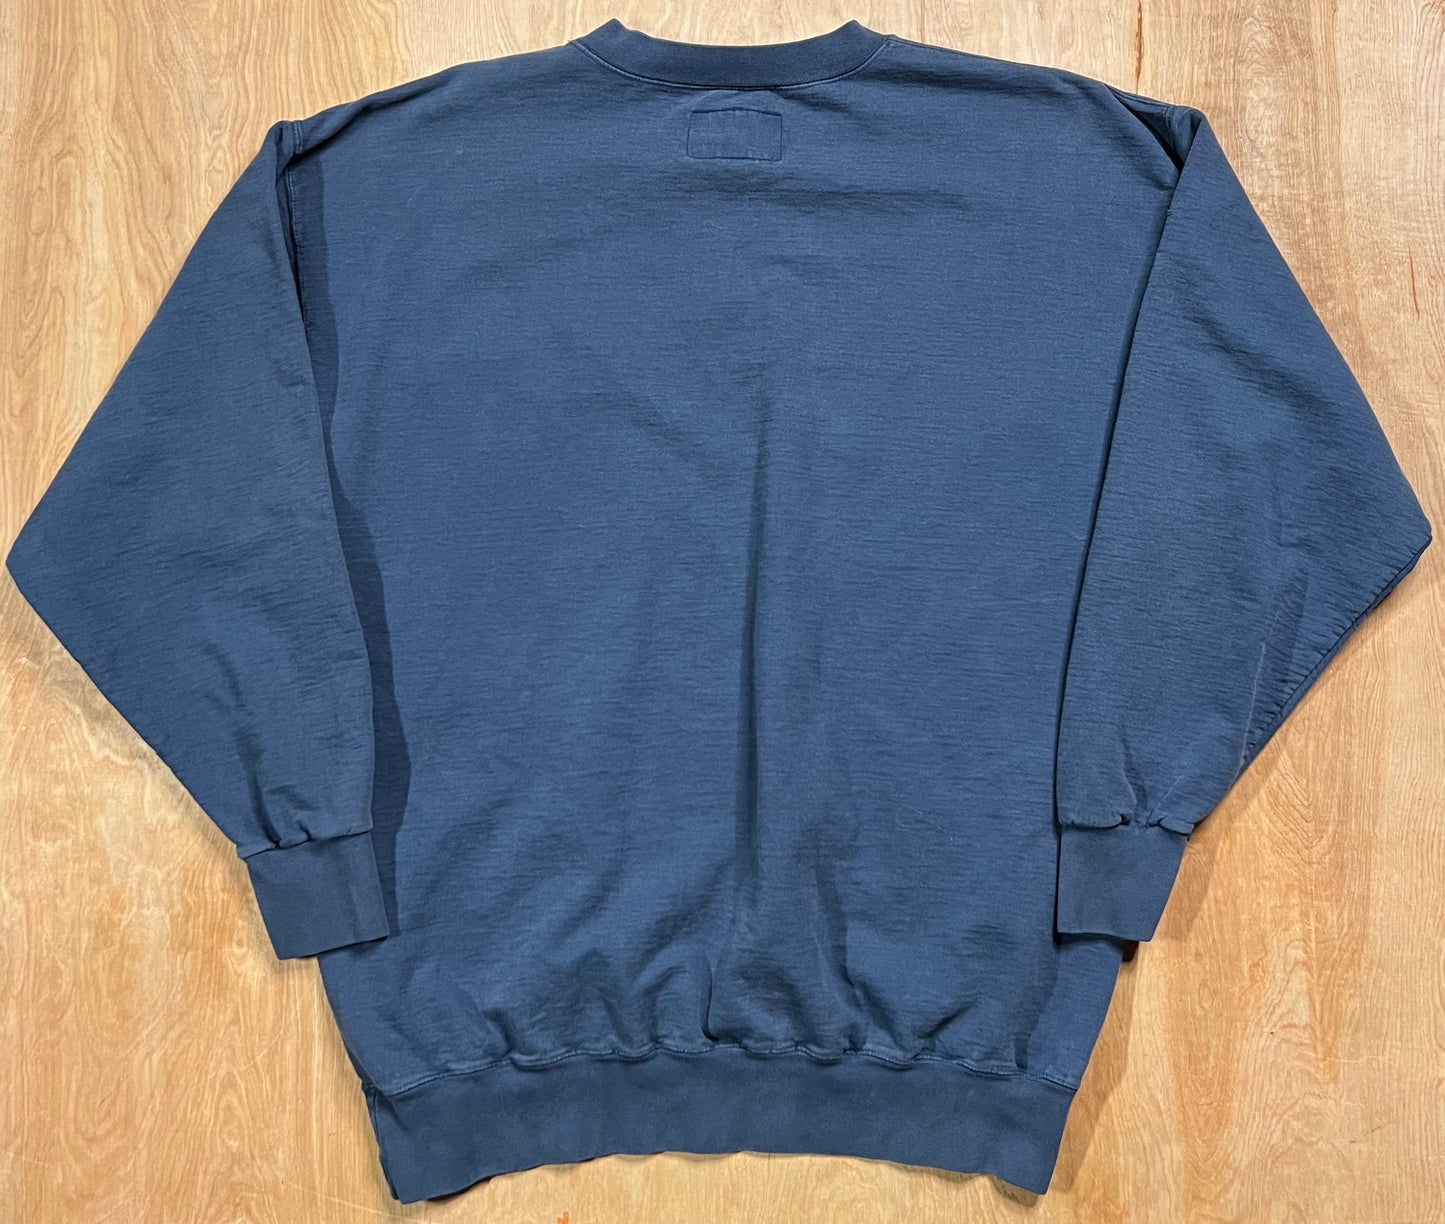 Early 2000's University of Wisconsin Eau Claire Faded Crewneck